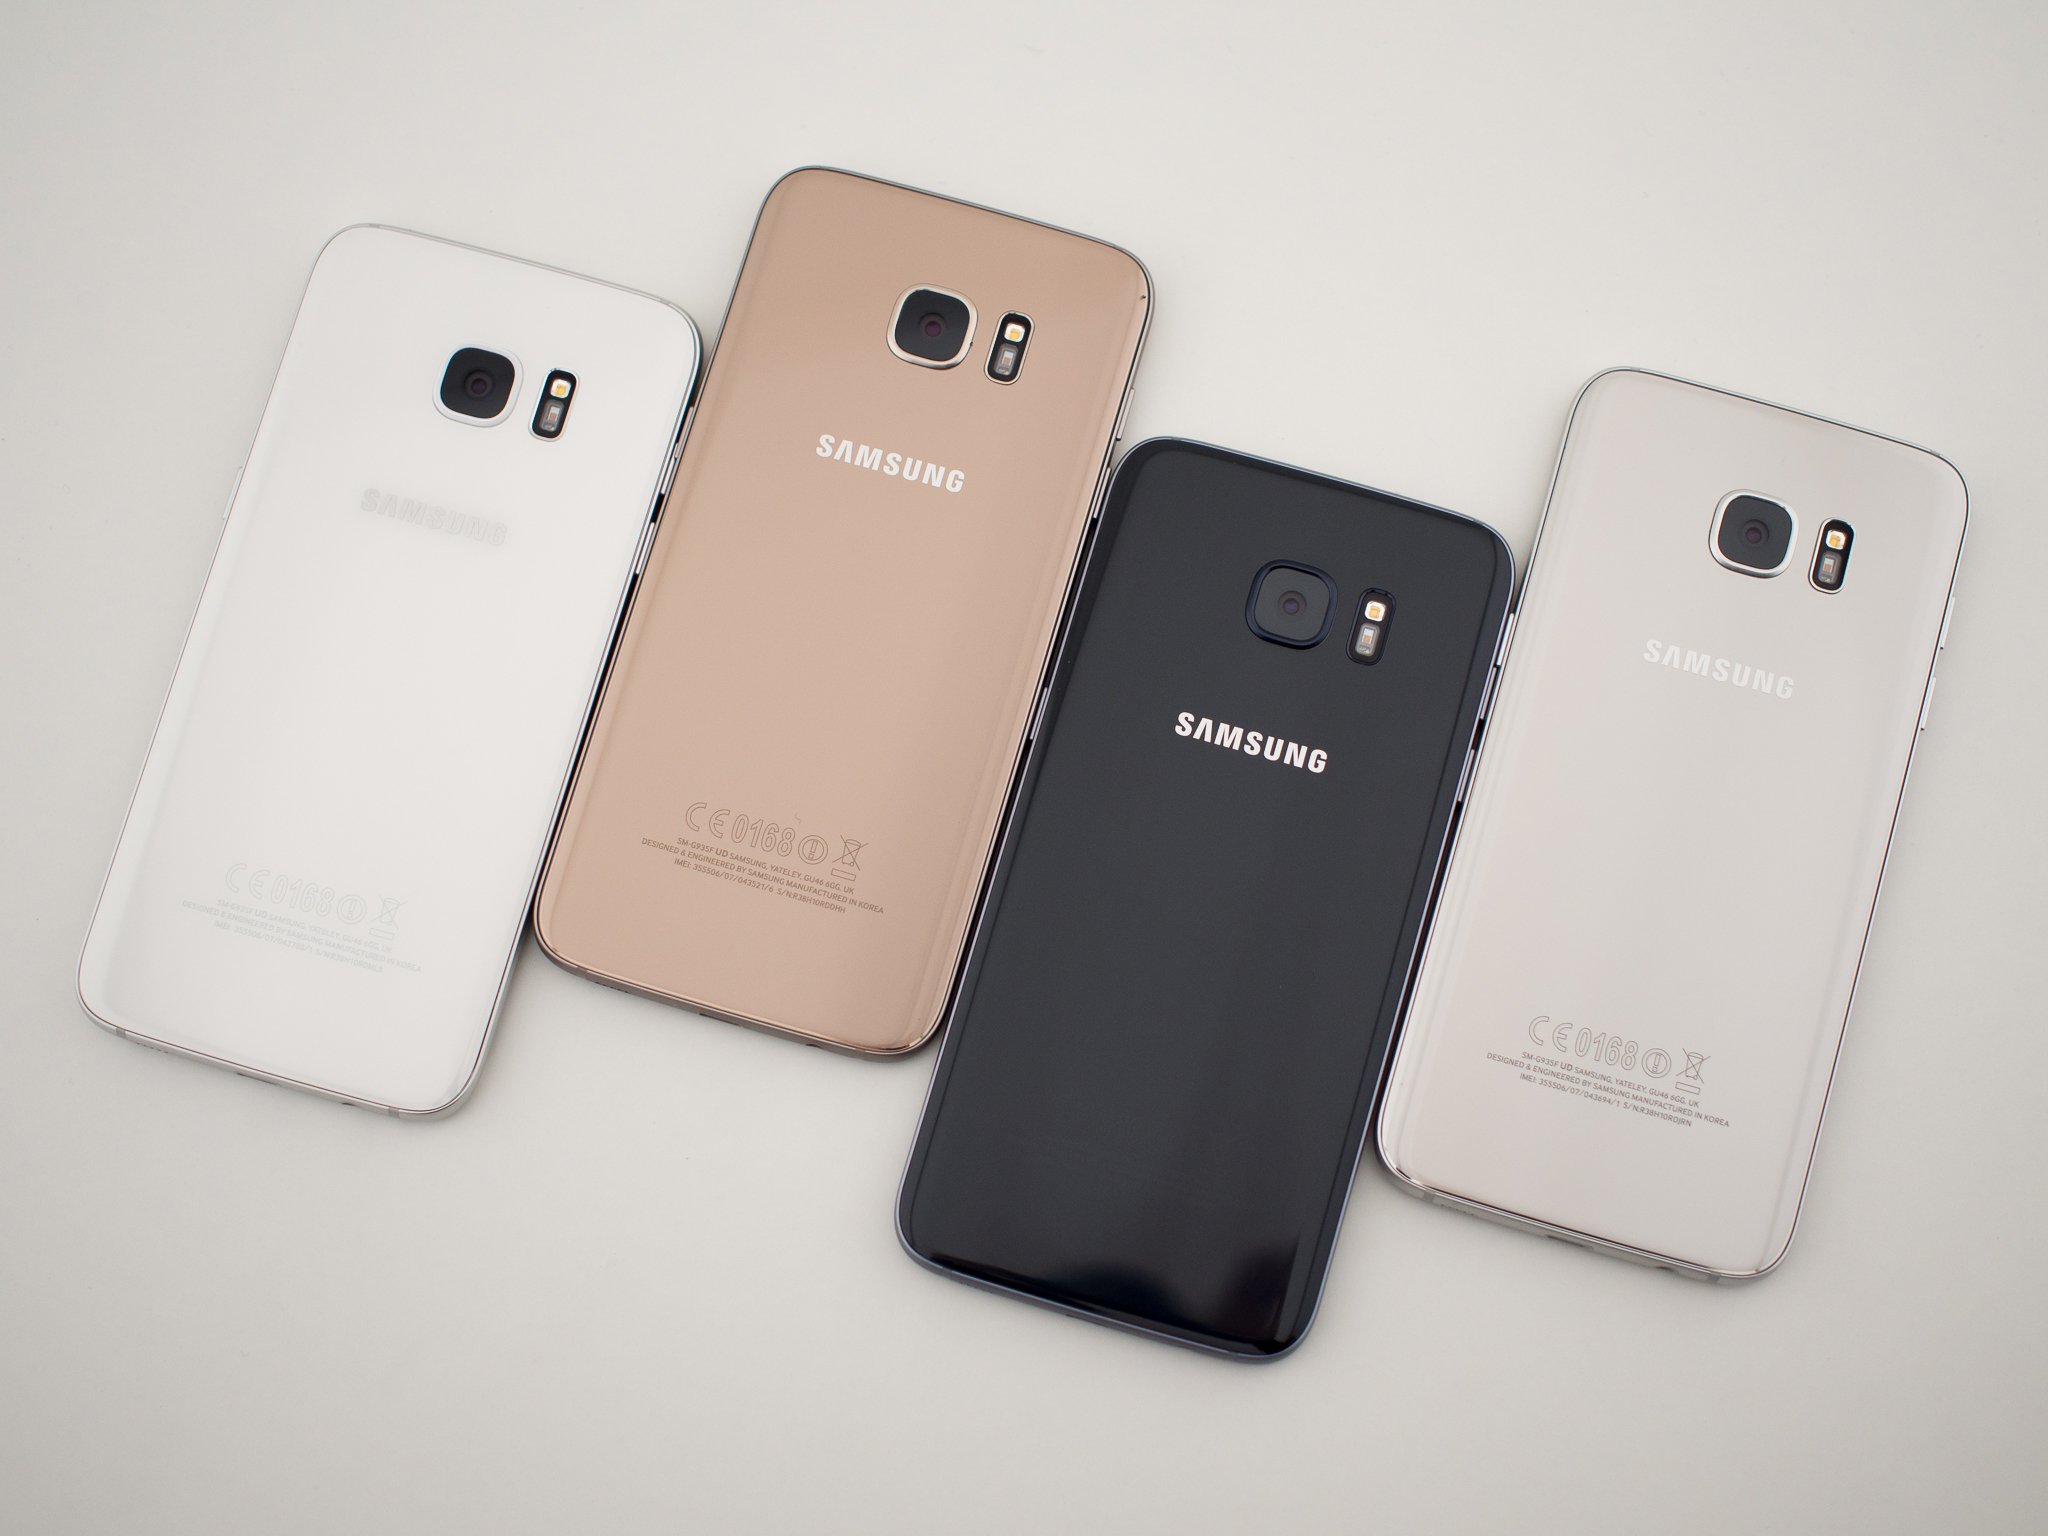 heuvel Terminal Donau What color Samsung Galaxy S7 or S7 edge should you get: White, gold, silver  or black? | Android Central